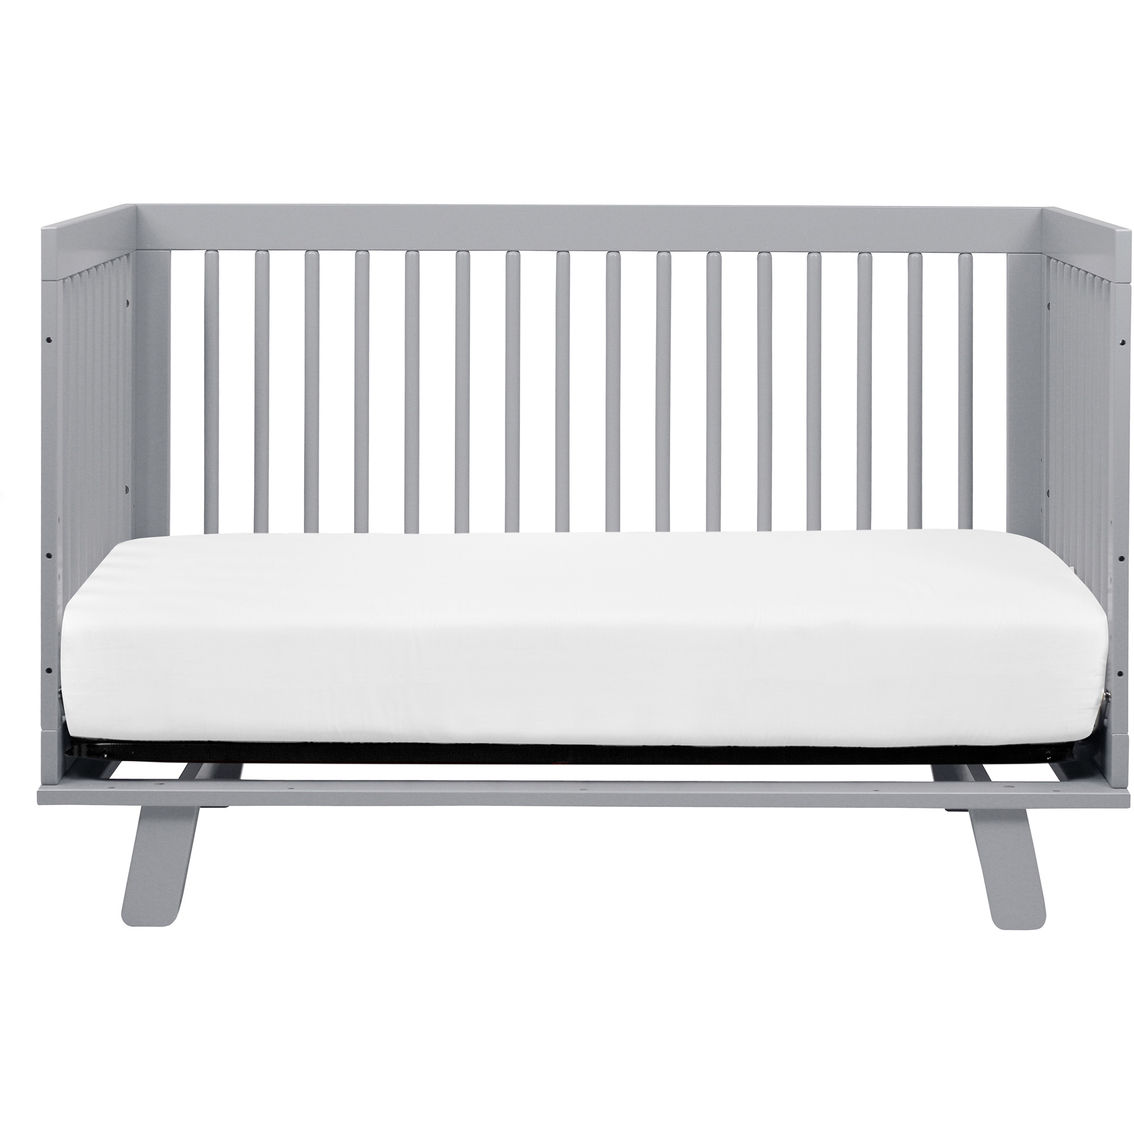 Babyletto Hudson 4 in 1 Crib - Image 6 of 8